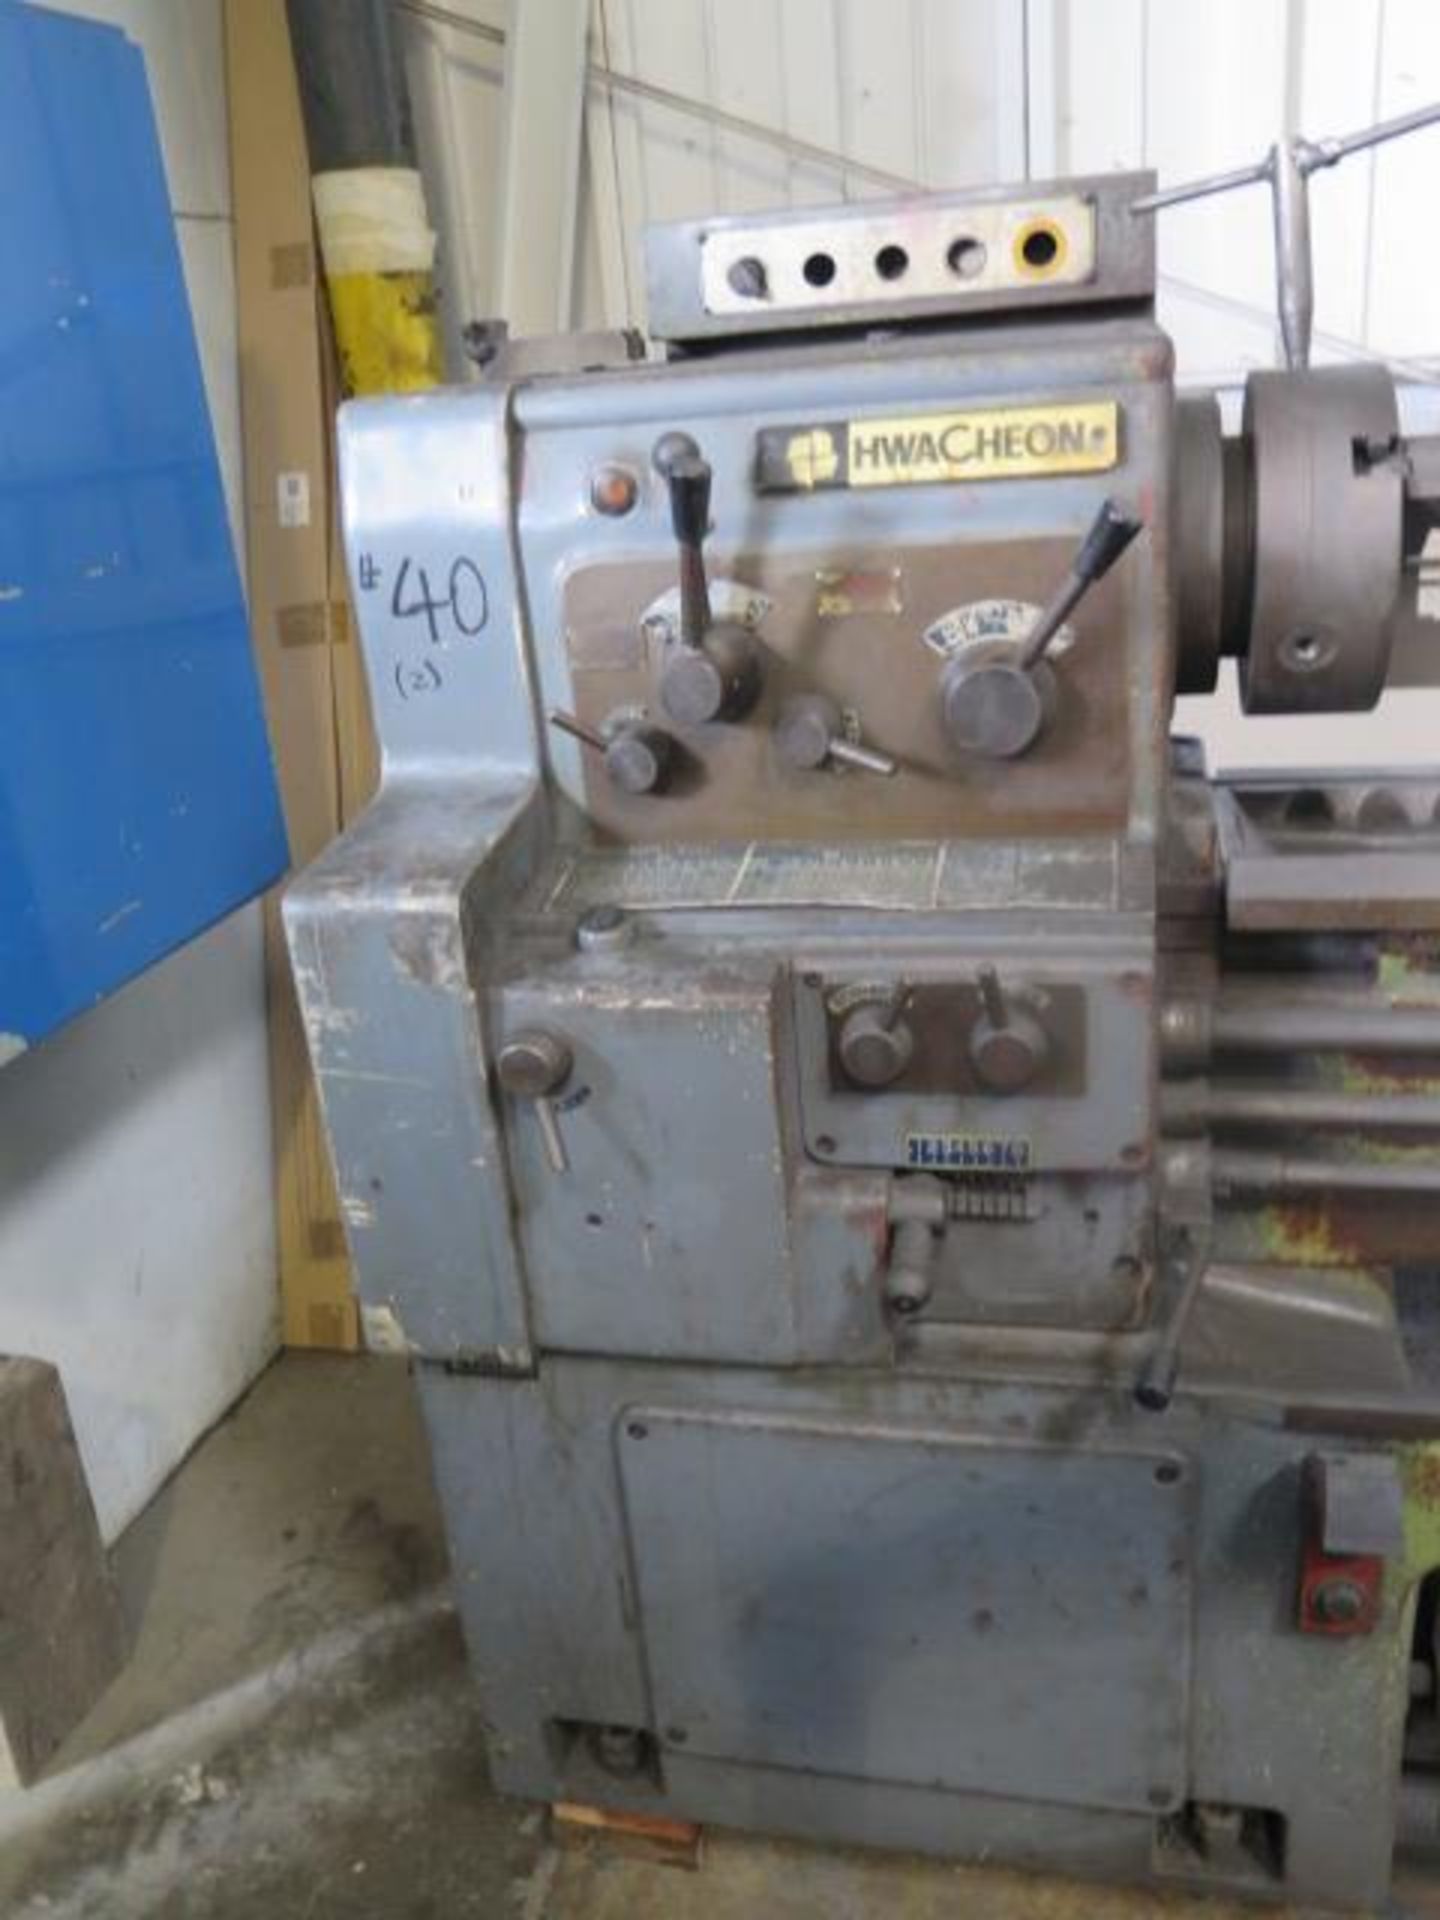 Hwa Cheon 17”GX40 17” x 40” Geared Head Gap Bed Lathe w/ 32-1800 RPM, Inch Threading, SOLD AS IS - Image 4 of 16